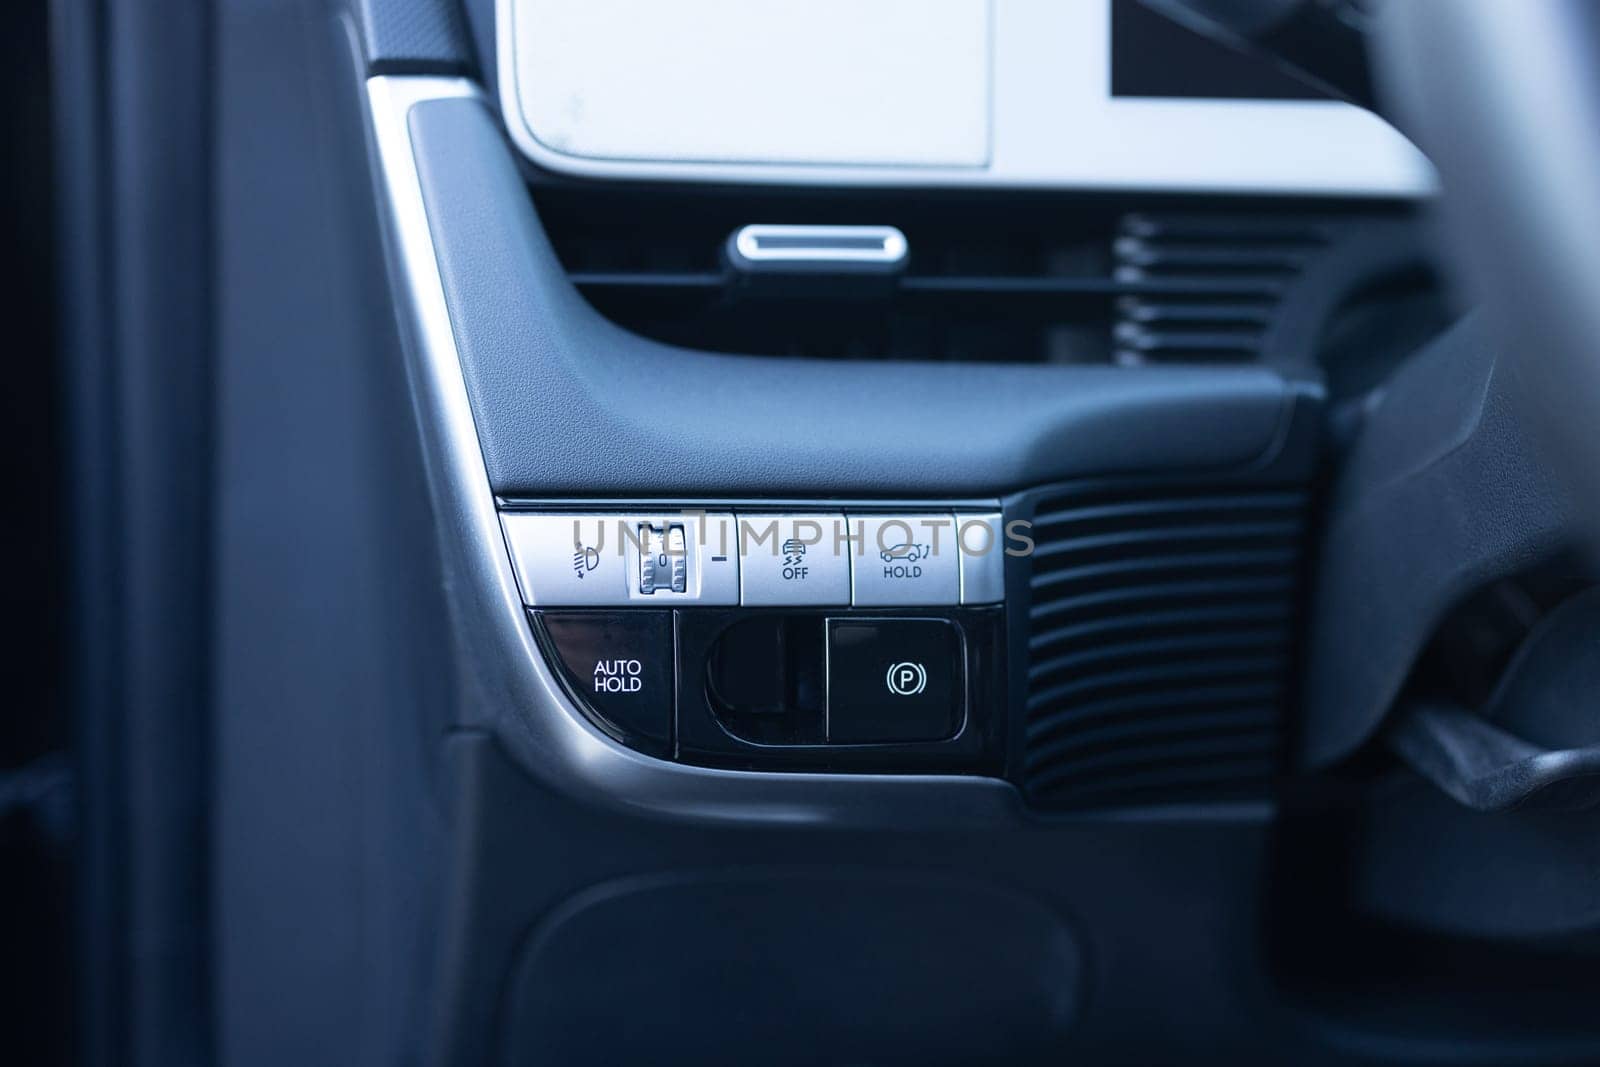 Auto hold button in a modern vehicle. ESP electronic stability program control. Interior detail of a modern electric car. ESP button. Car light switch. Dimming light button by uflypro